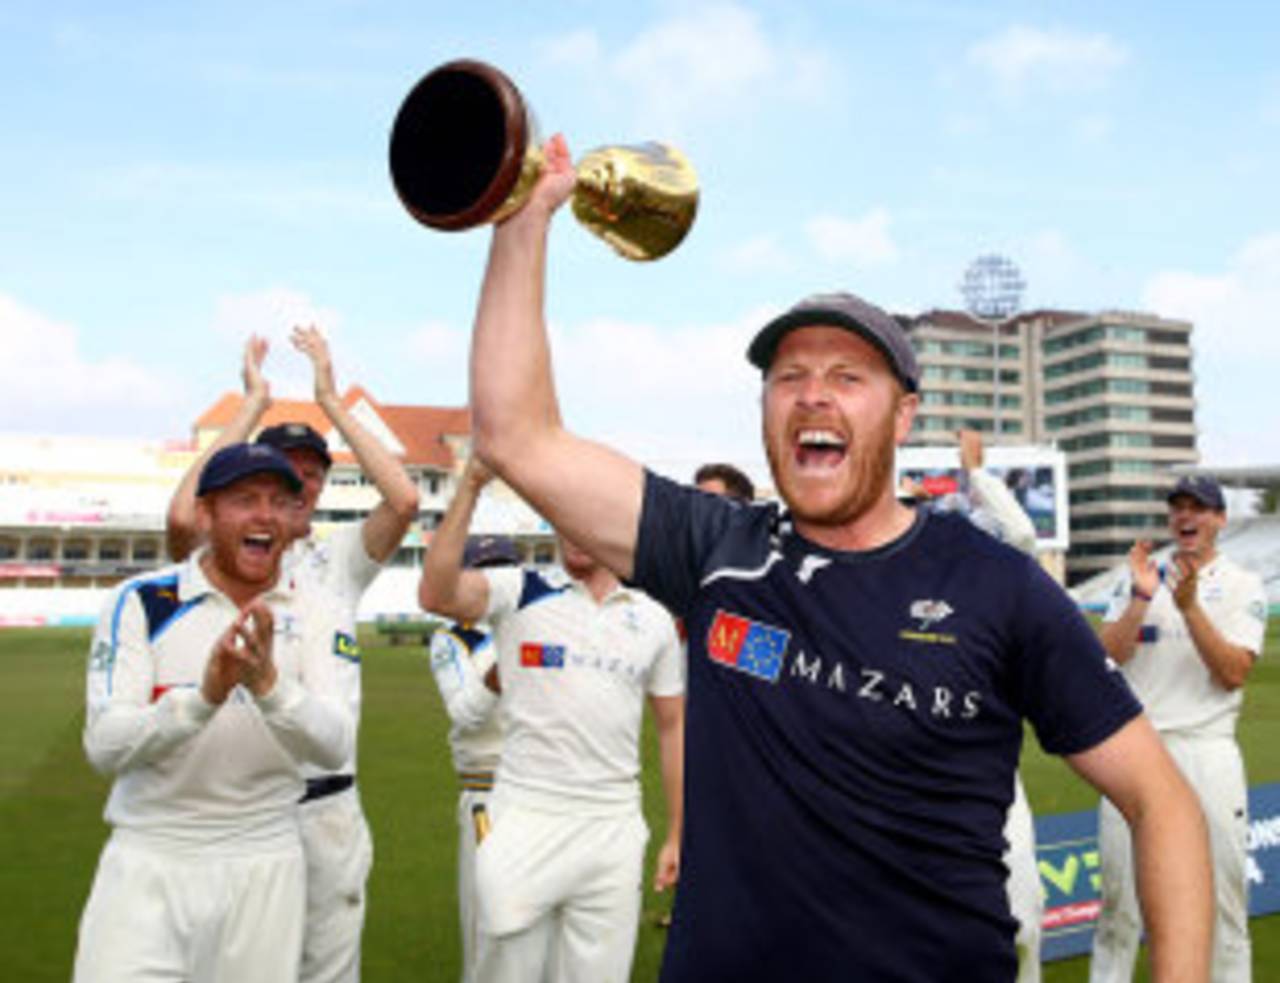 Andrew Gale, Yorkshire's suspended captain, gets his hands on the trophy, Nottinghamshire v Yorkshire, County Championship, Division One, Trent Bridge, September 12, 2014